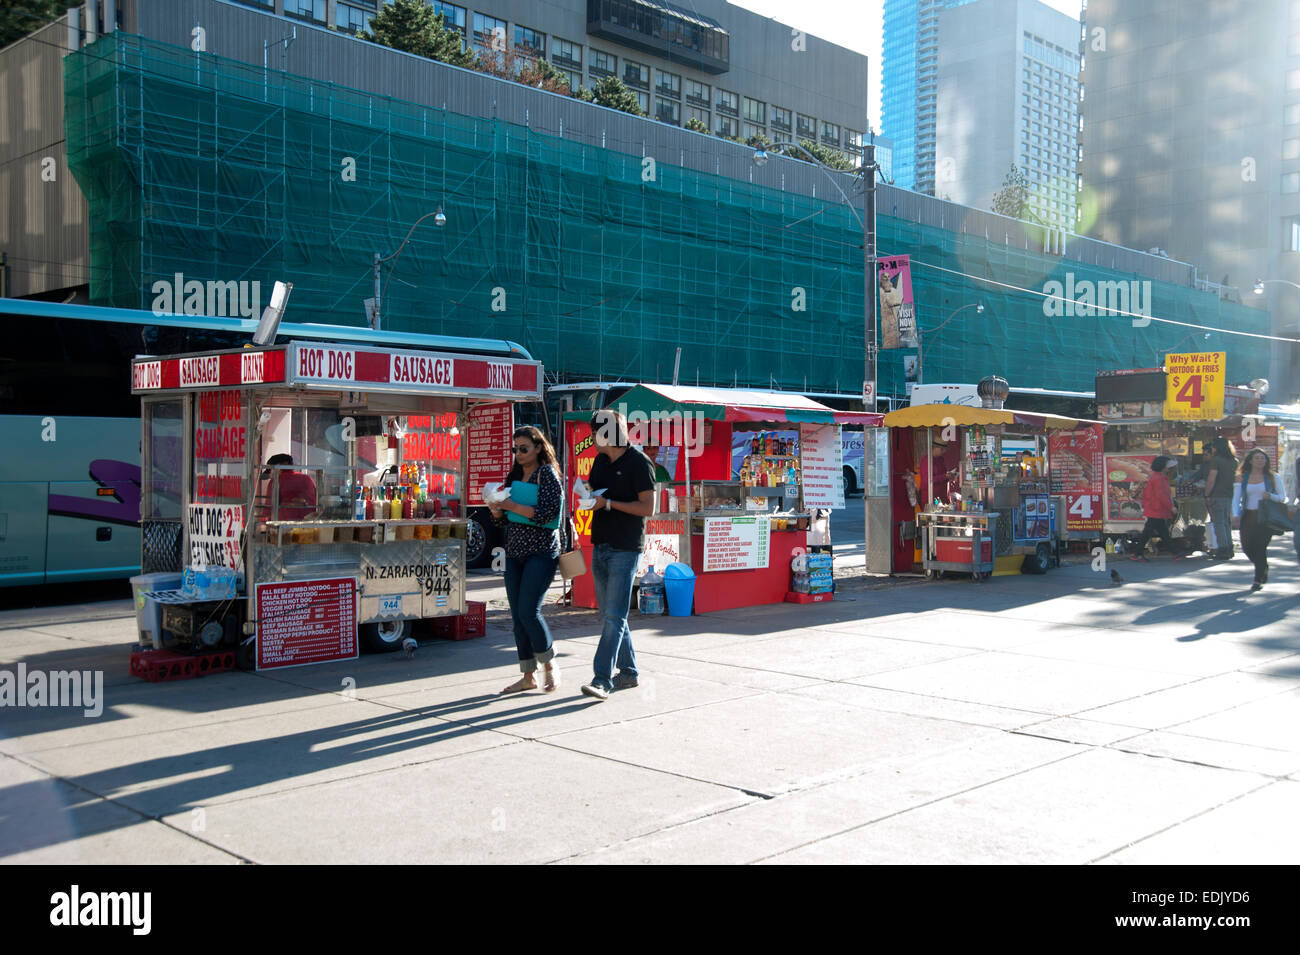 Food kiosks outdoors in Vancouver, British Columbia, Canada Stock Photo